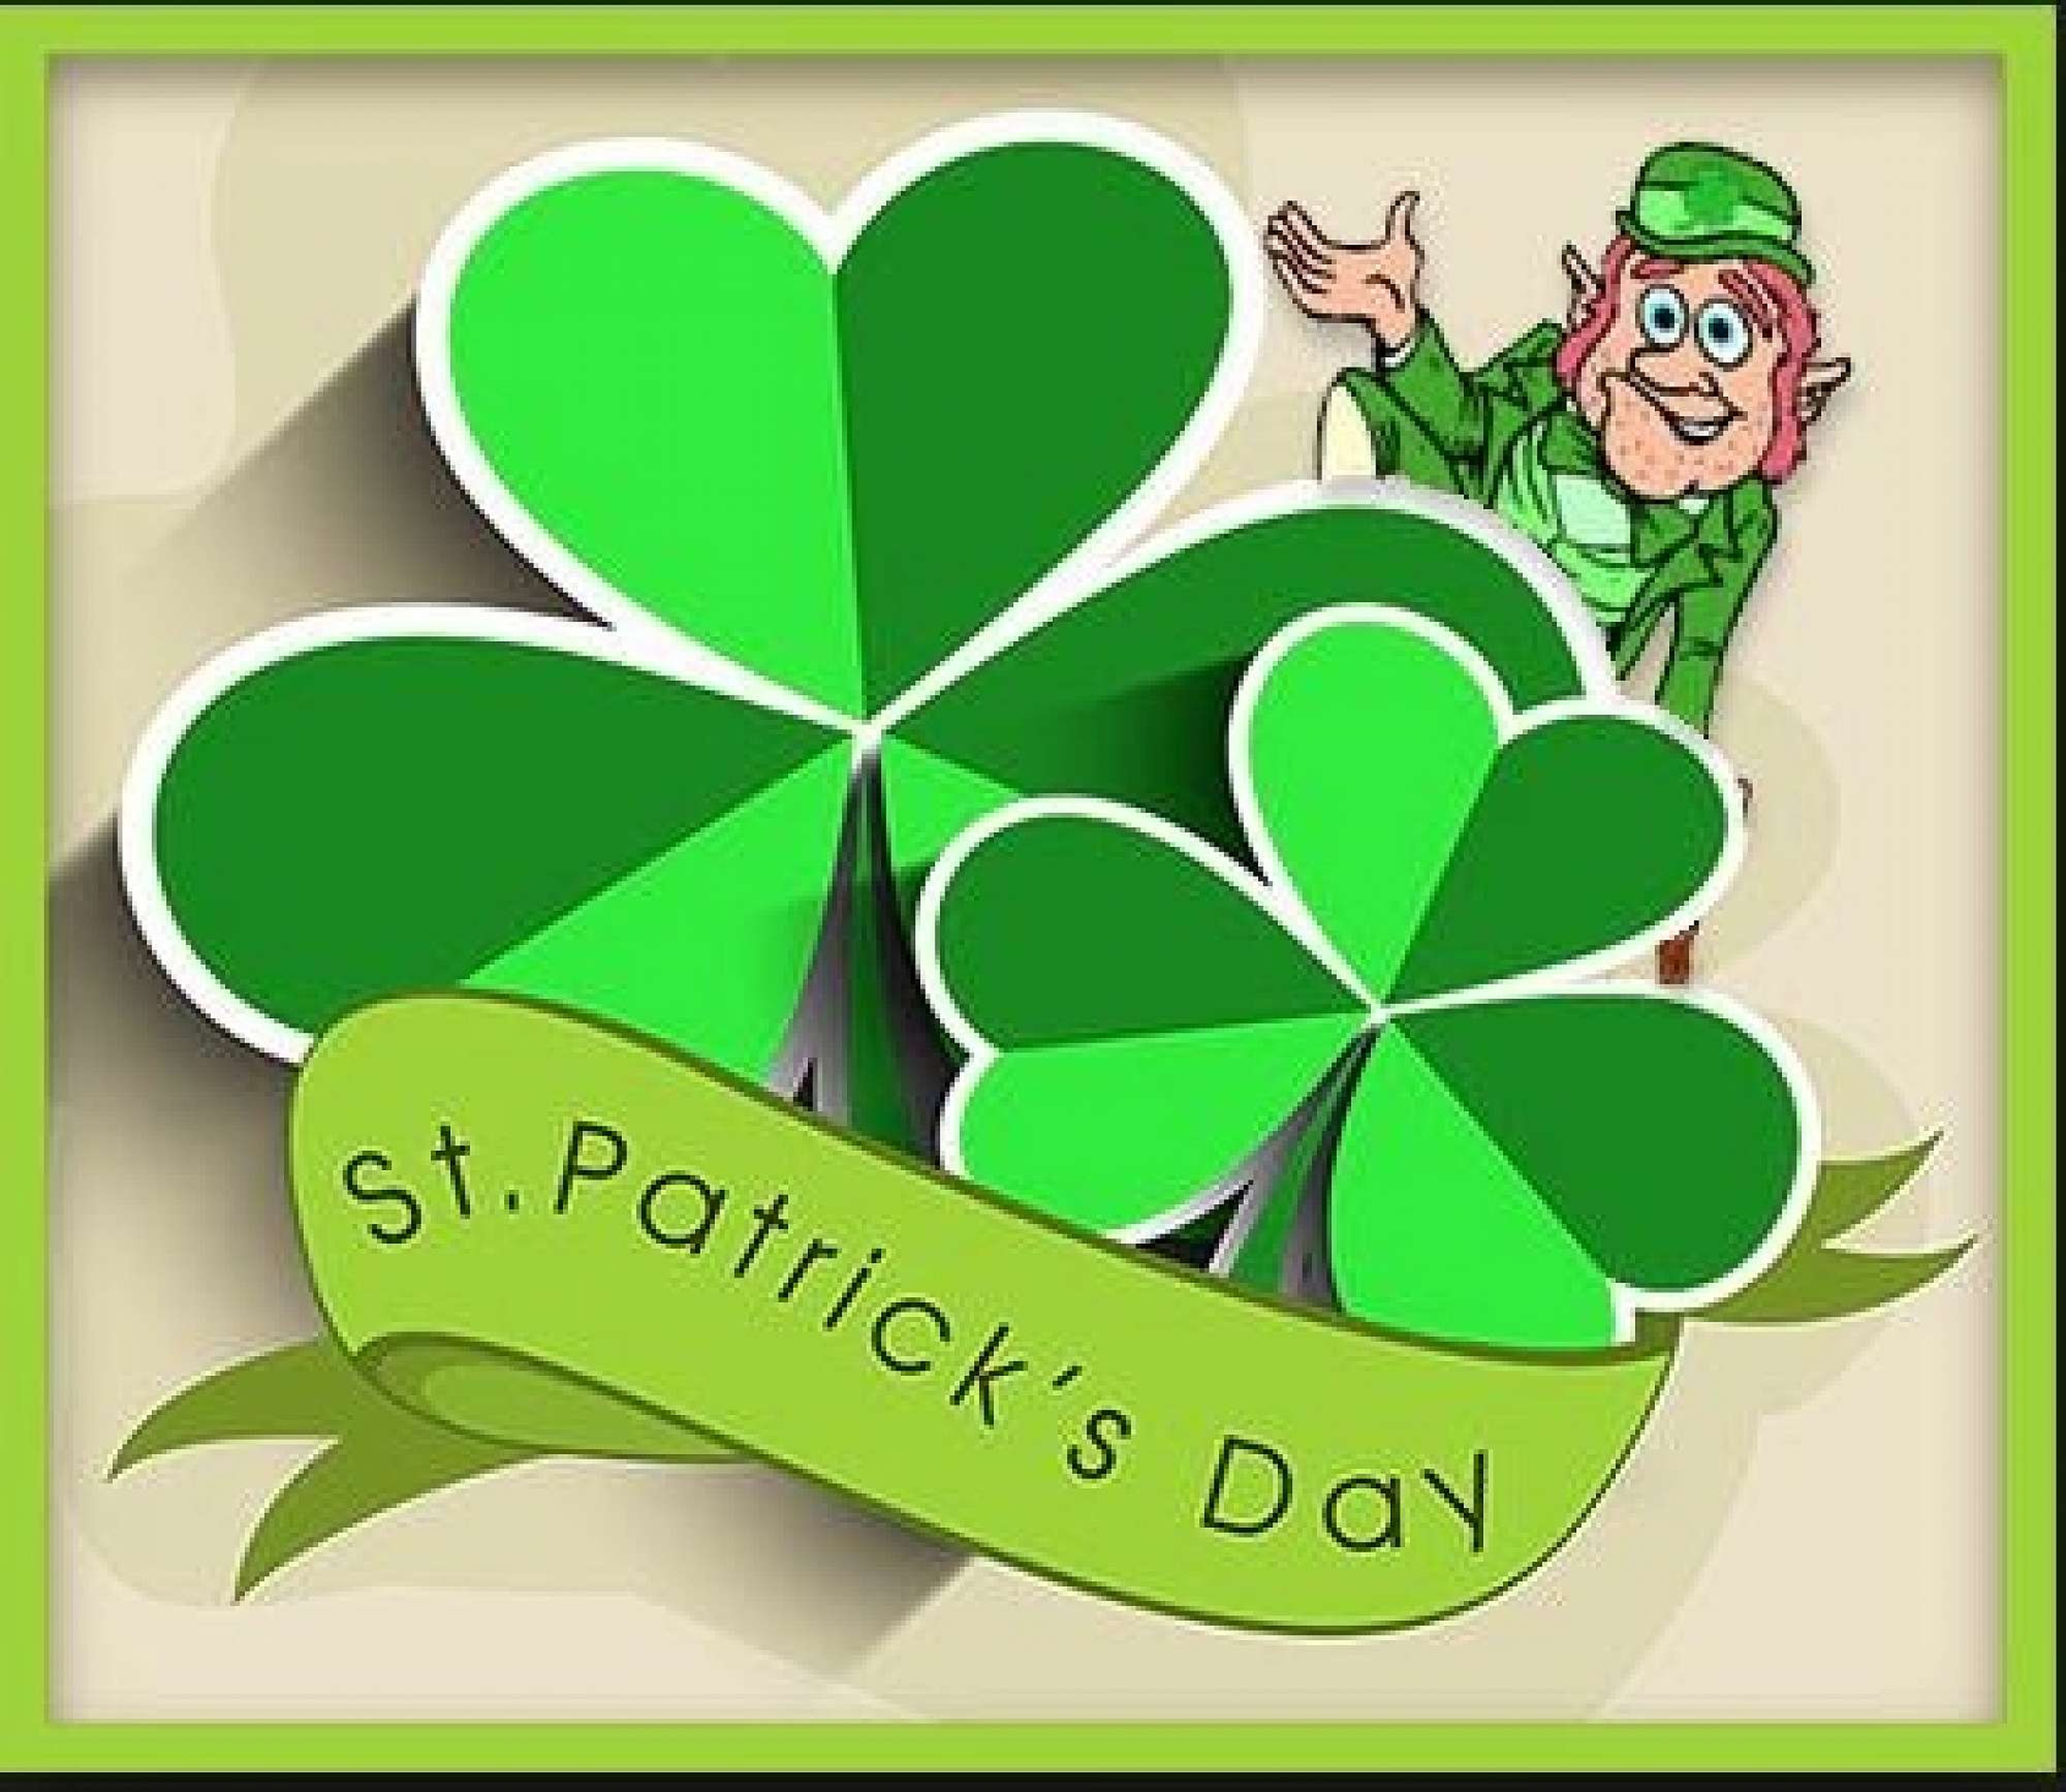 The St Patricks Day Online Slot Demo Game by Gamescale Software